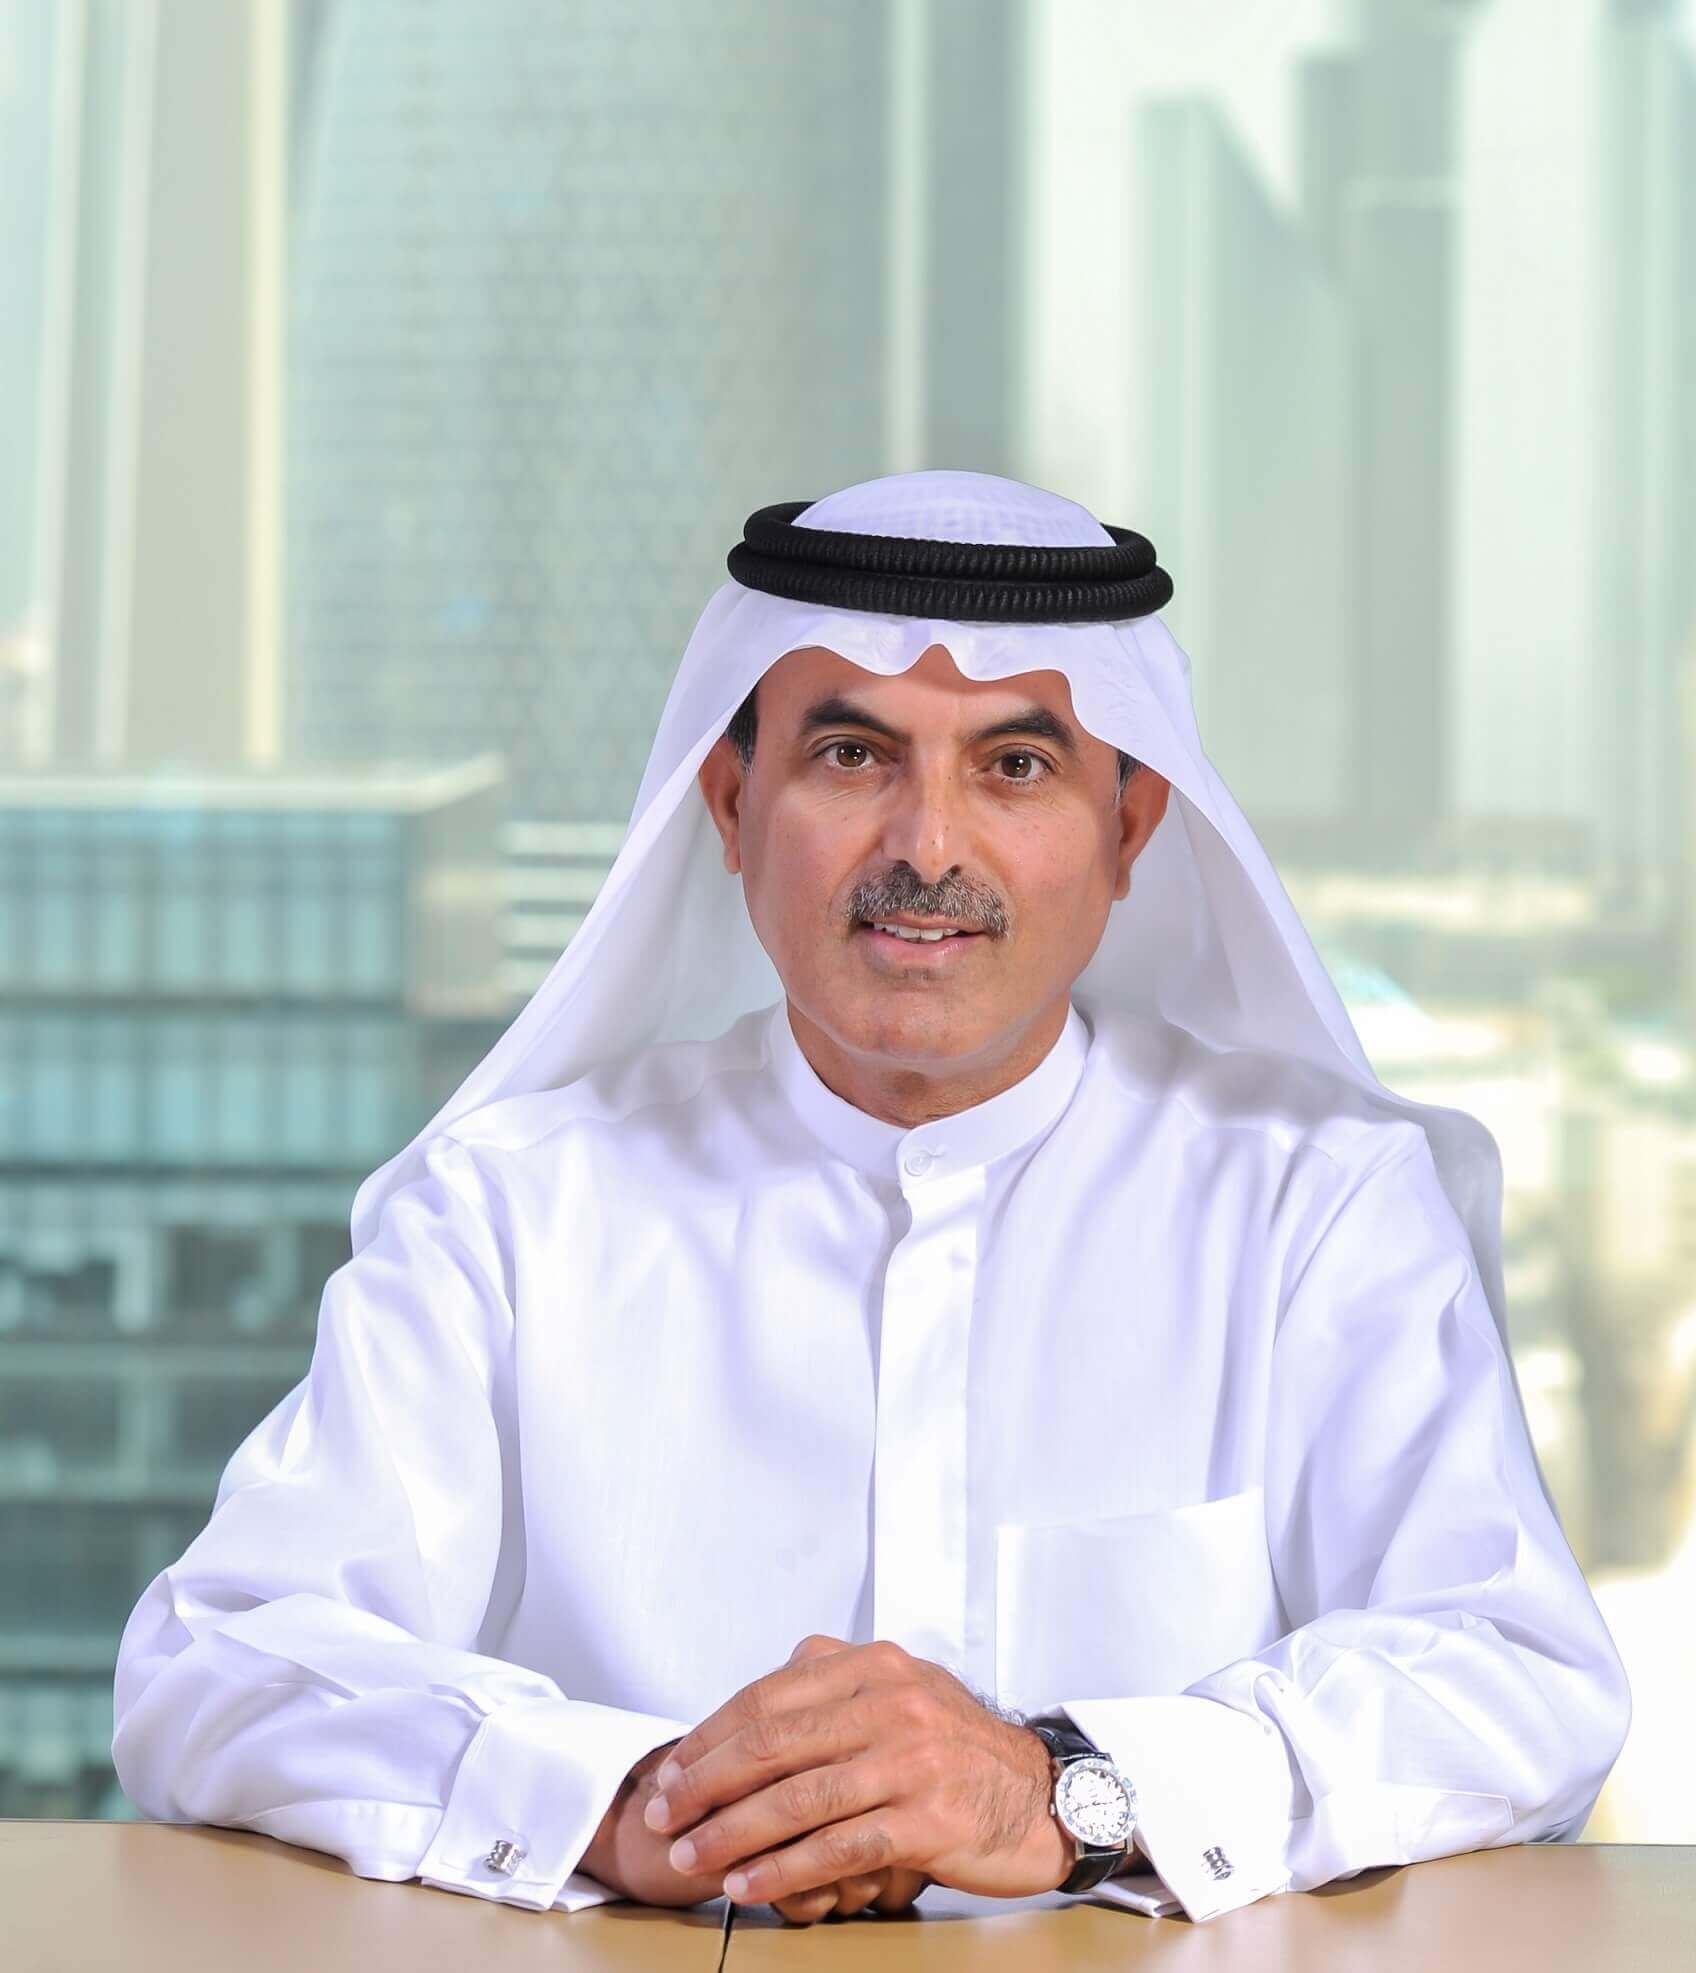 Dubai Chambers unveils ‘The Deals Hub’ to unlock global trade and investment opportunities during Dubai Business Forum